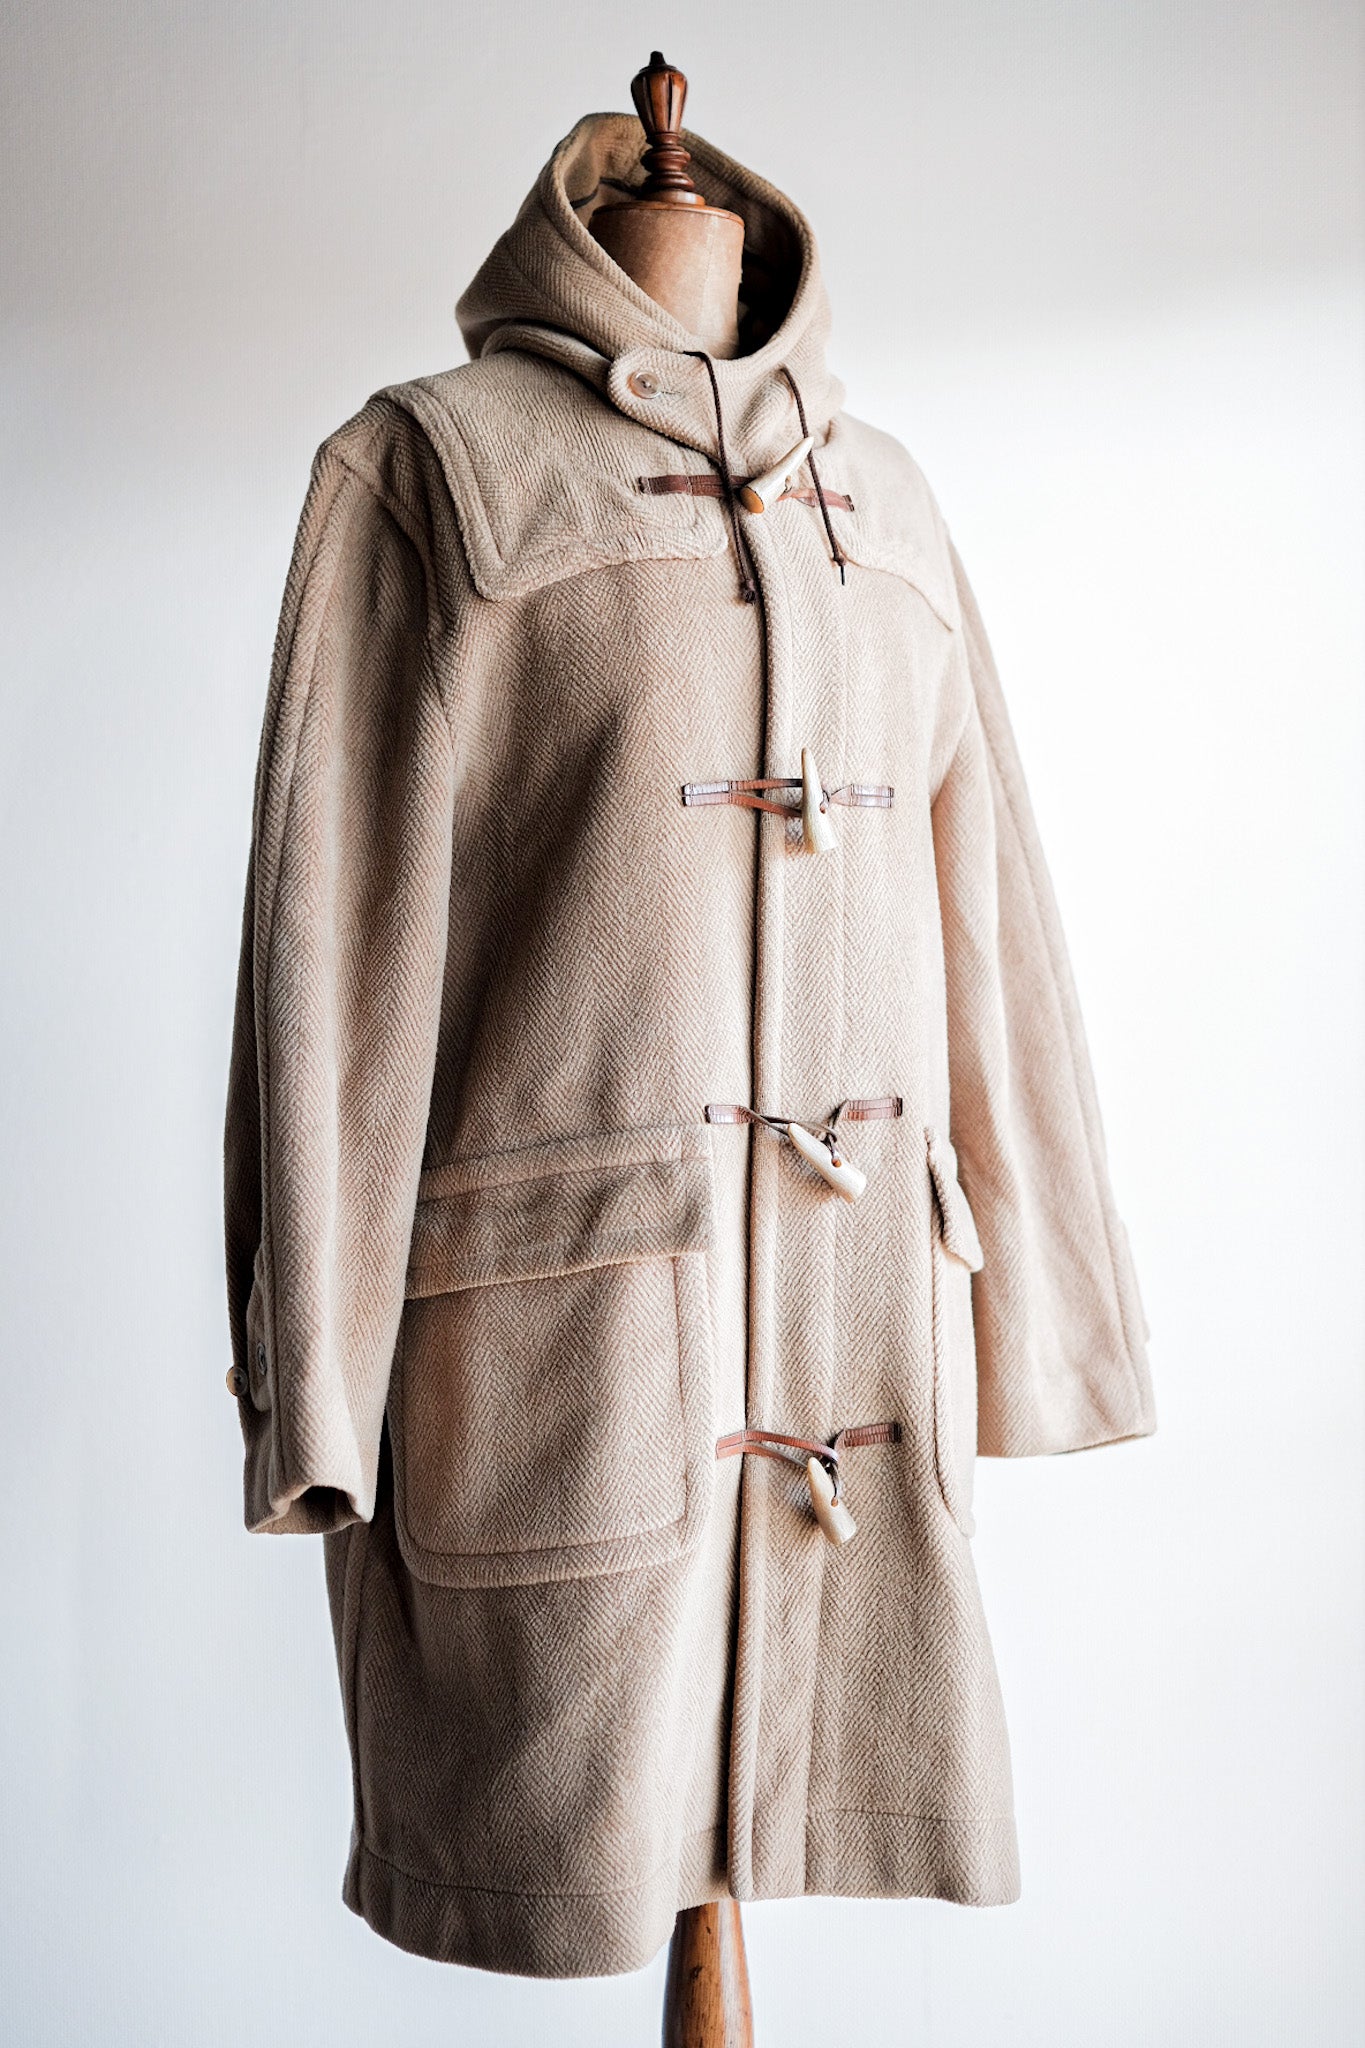 80's] OLD ENGLAND WOOL DUFFLE COAT MADE BY INVERTERE 